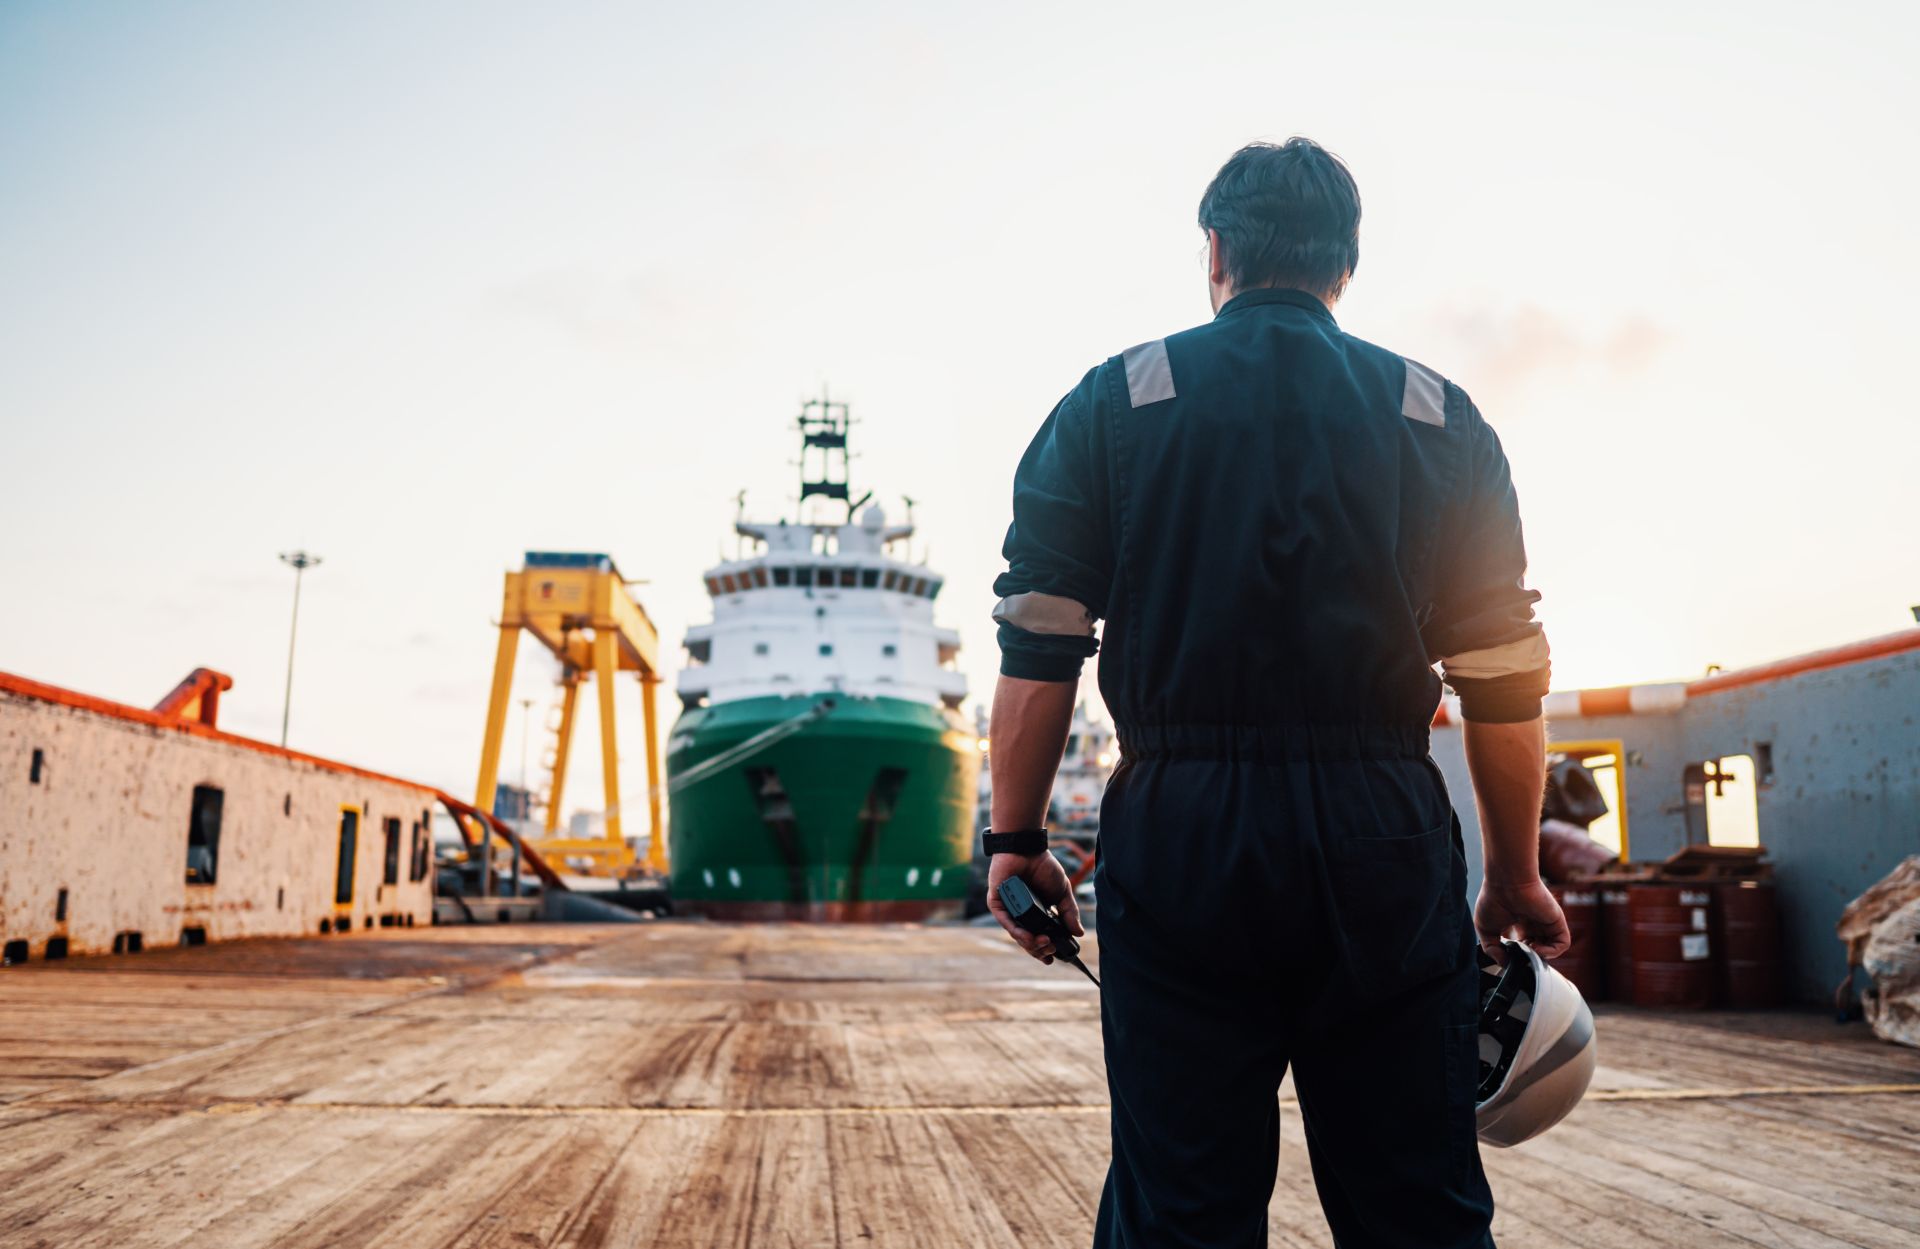 Maritime professional overlooking a cargo ship at the harbor during sunset, symbolizing industry expertise and leadership in maritime training and safety.